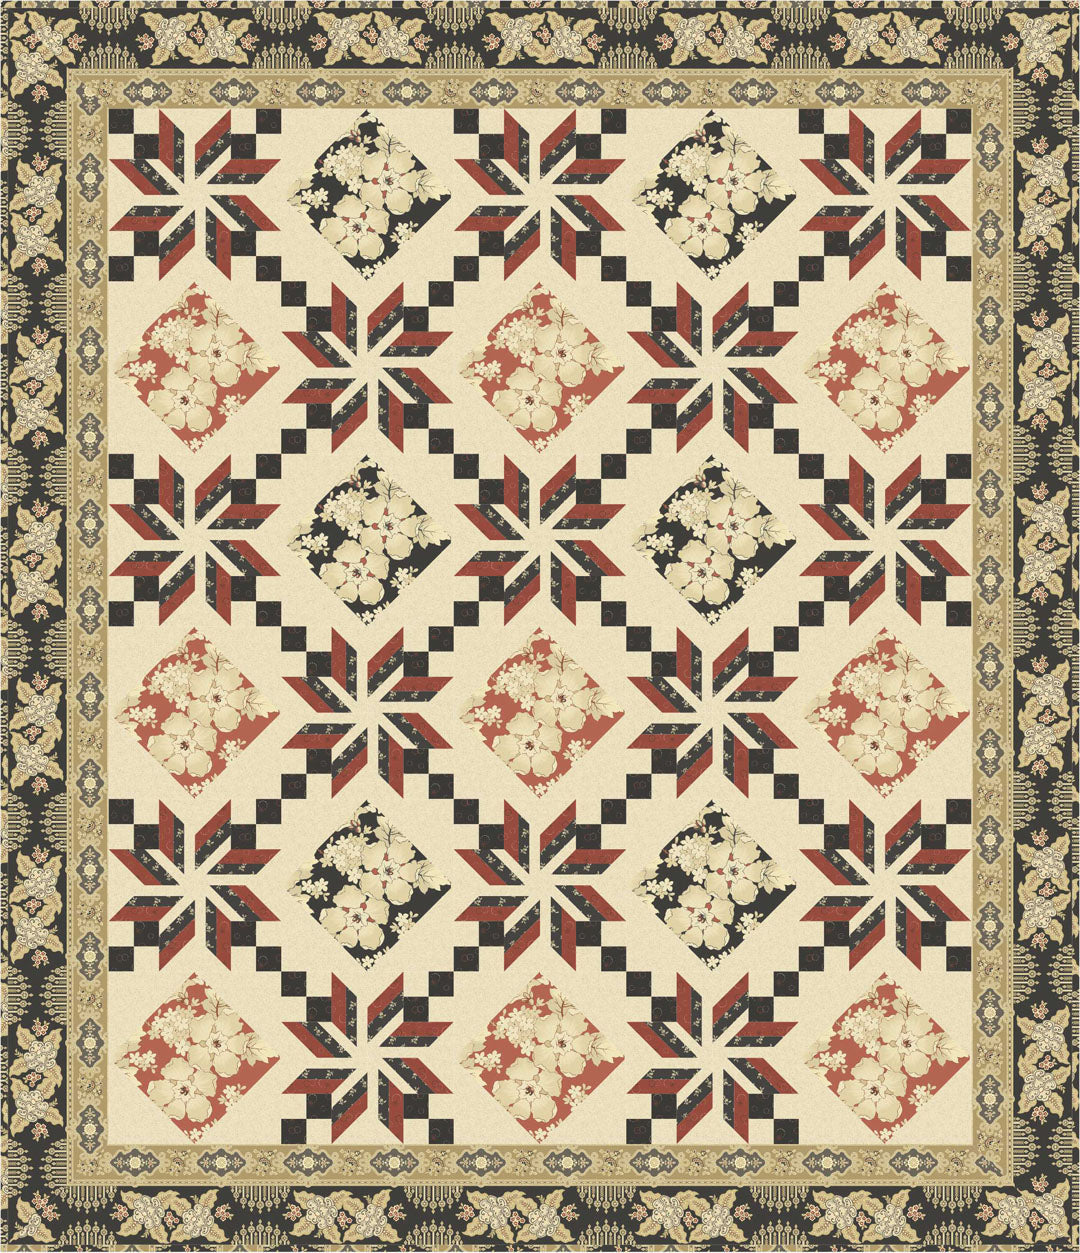 Eden Quilt<br>by Toby Lischko<br>Vintage Prestige Collection<br>Pattern for Purchase<br>Available January 2019